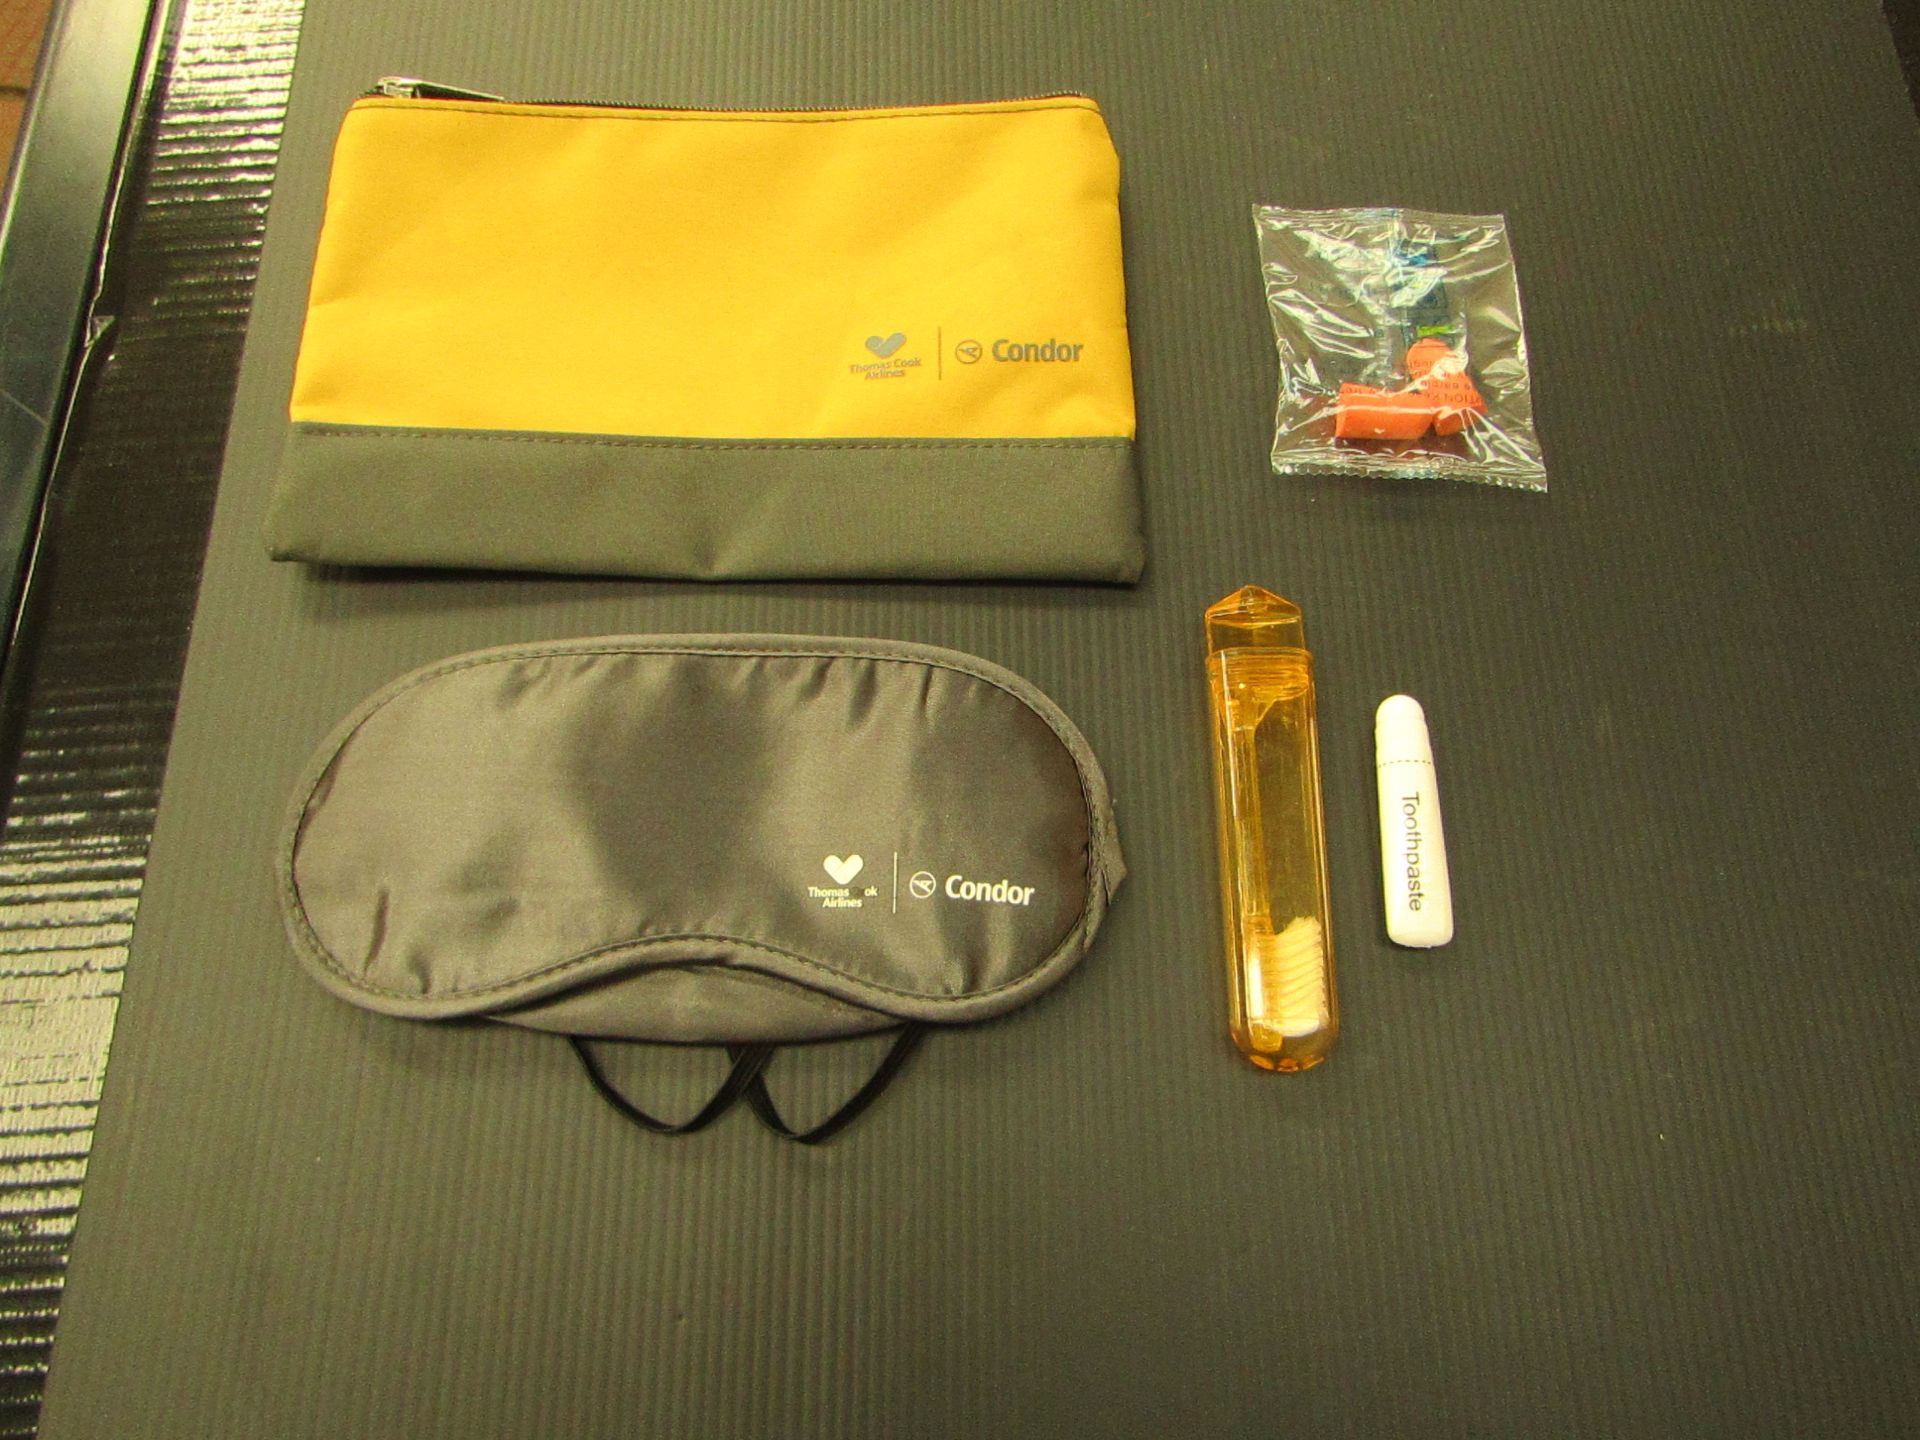 10 X Thomas Cook & Condor Airlines - Amenity Kit - Includes : Eye Sleeping Mask / Ear Buds / Tooth